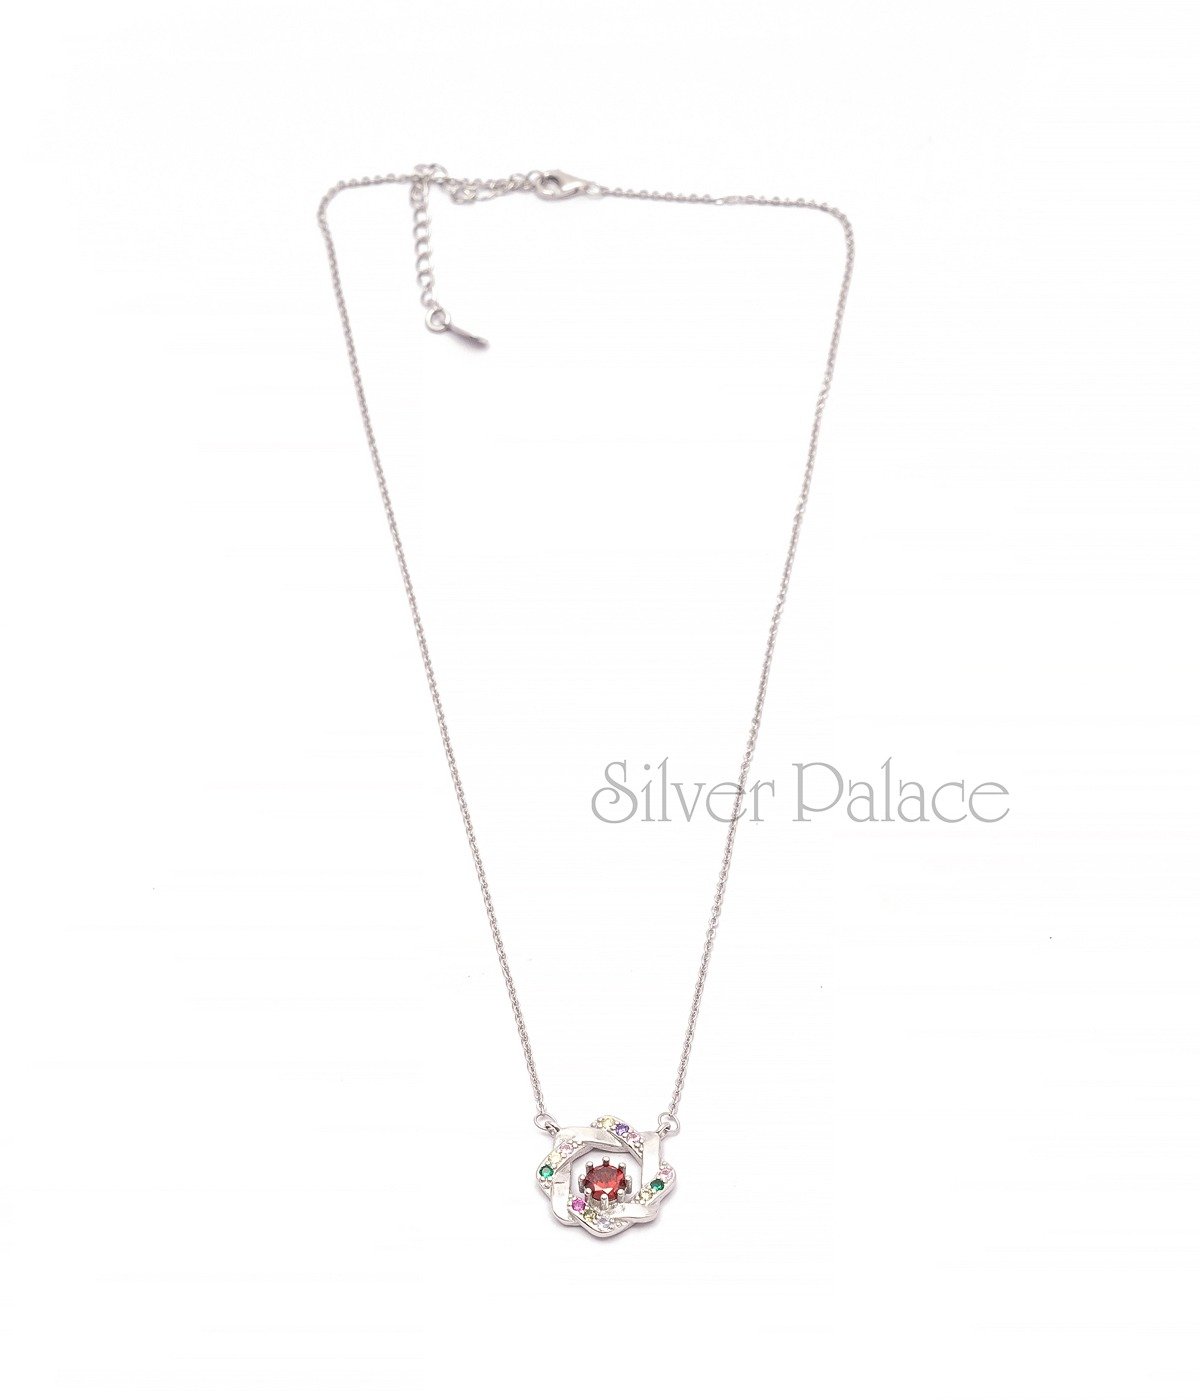 92.5 STERLING SILVER ROSE SHAPED STONE STUDDED PENDANT